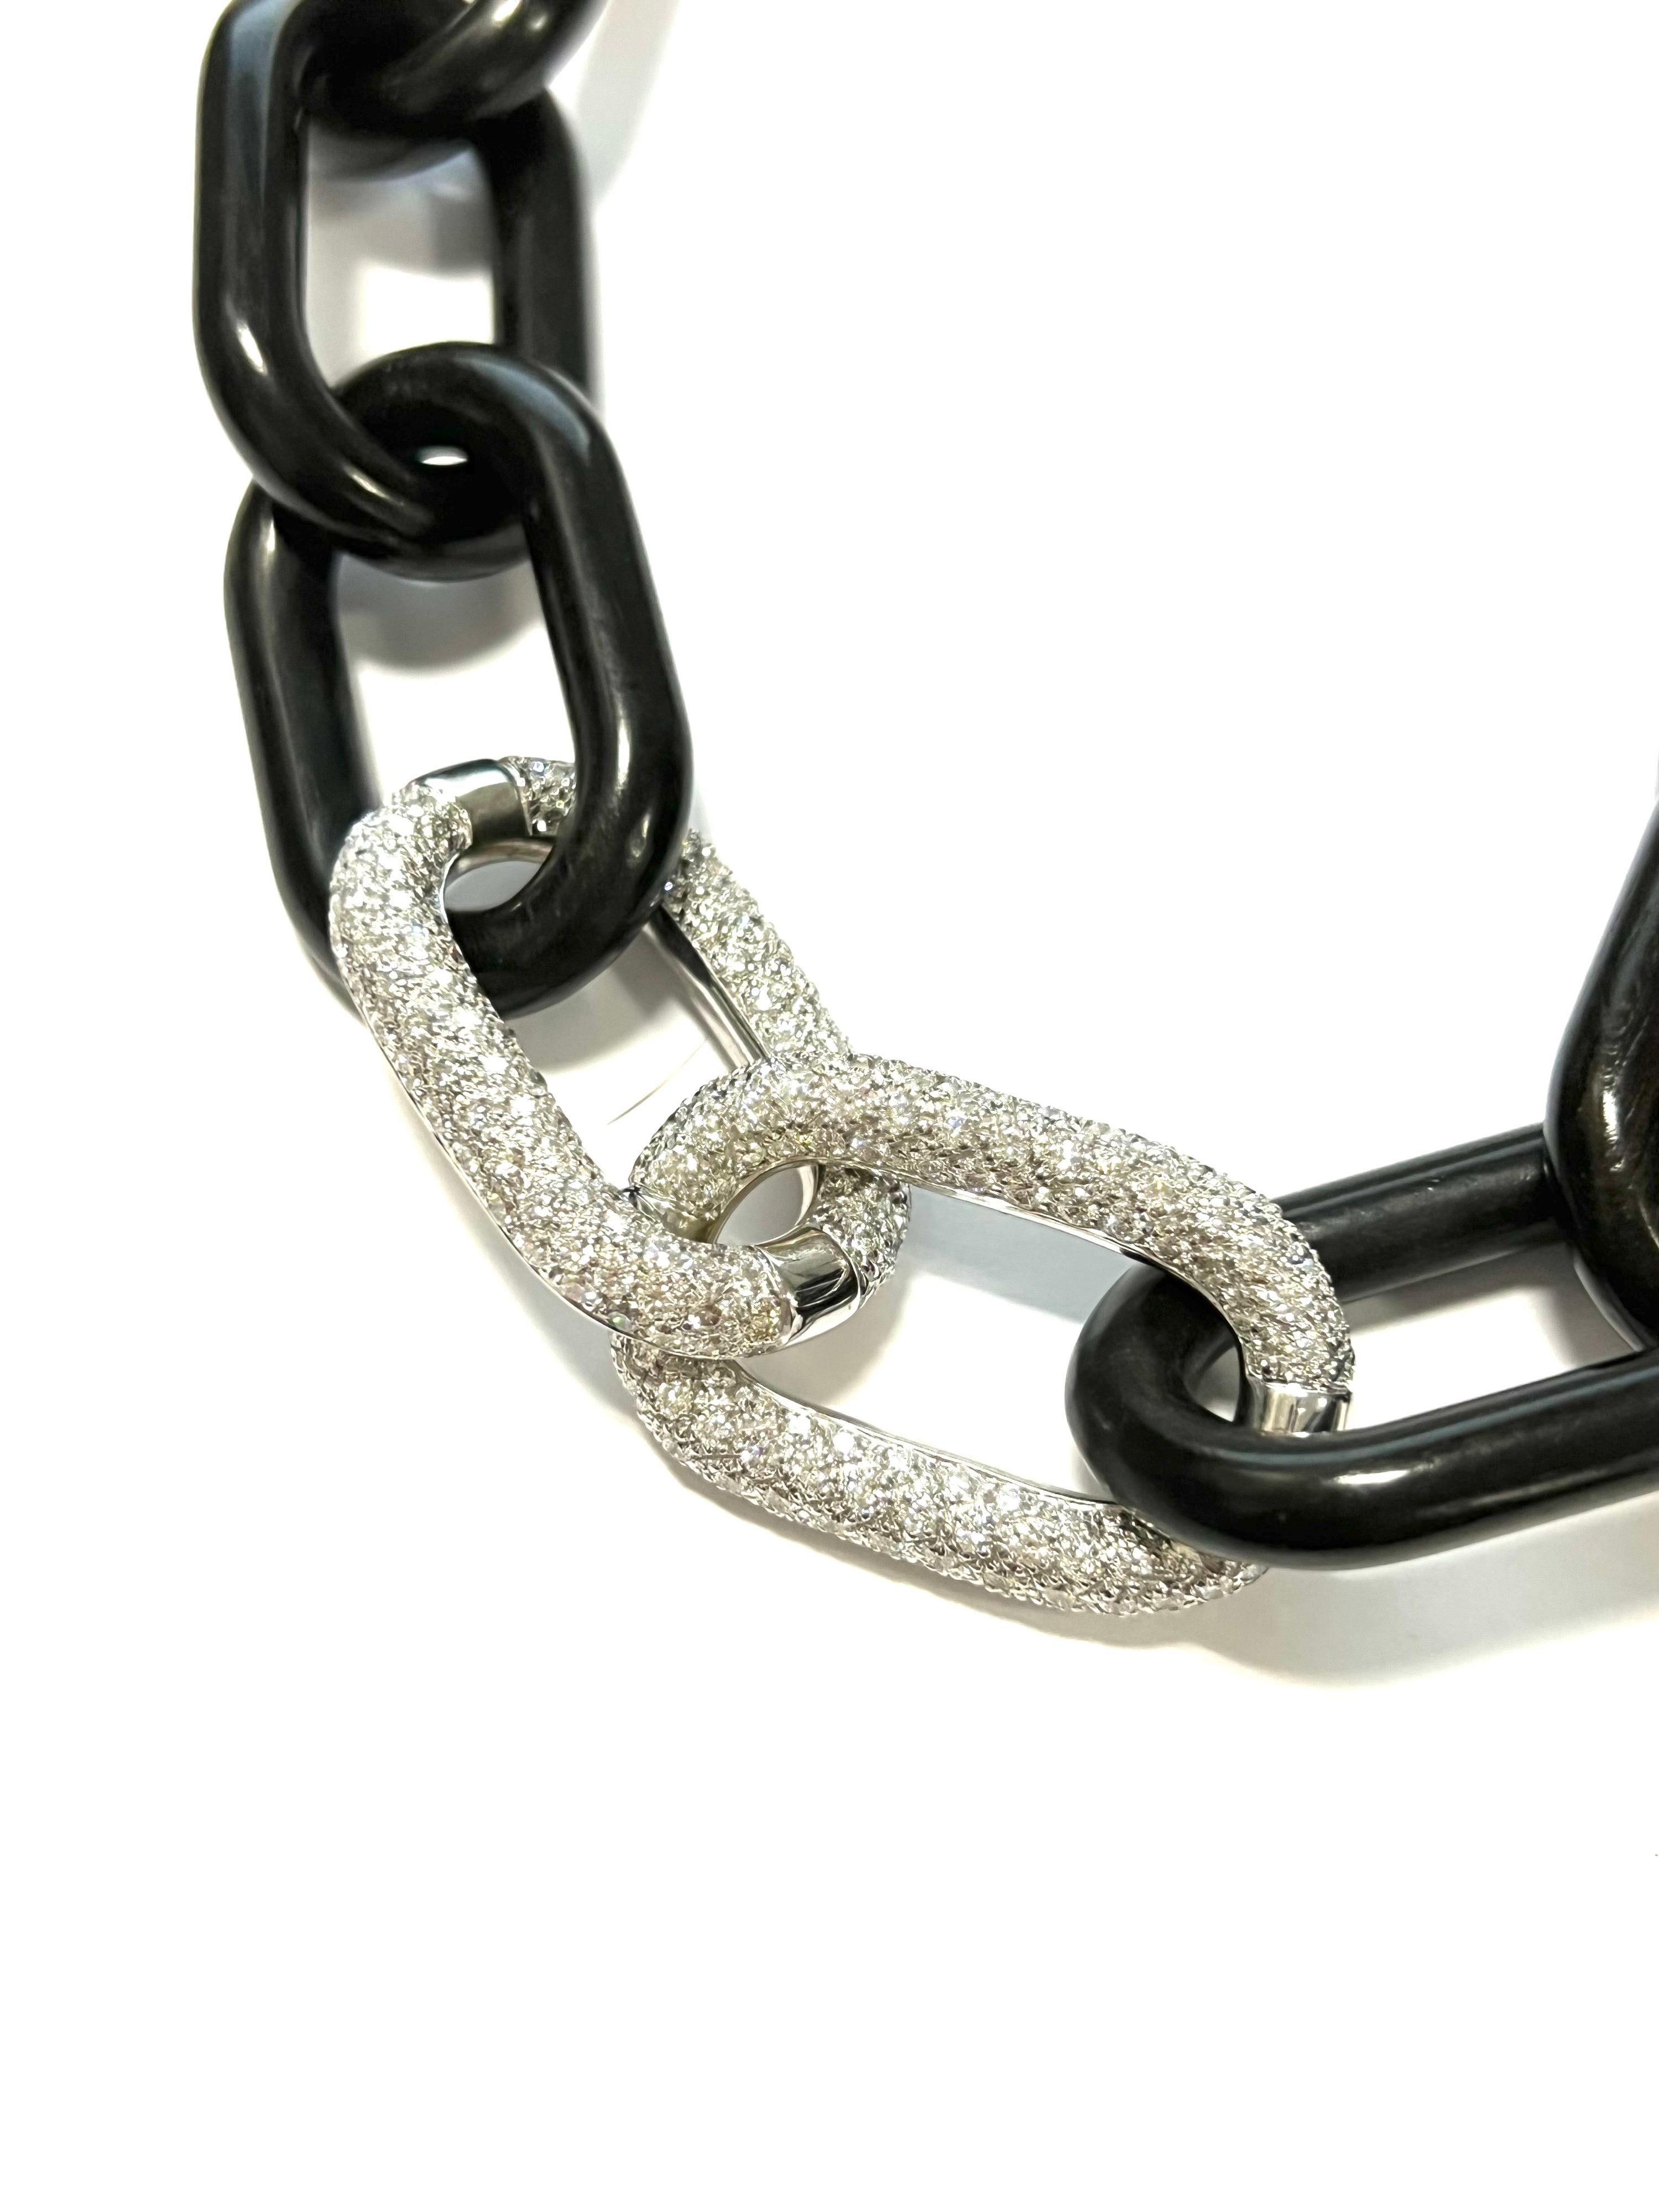 Chain Link Necklace With Mixed Rose Gold, Ebony, White Gold and Diamonds.
This is an unusual tricolor chain necklace
Total Weight gr. 100,5
Gold weight gr. 56,6
Diamonds GVVS ct. 4,98
Stamp ITALY, 10 MI, 750